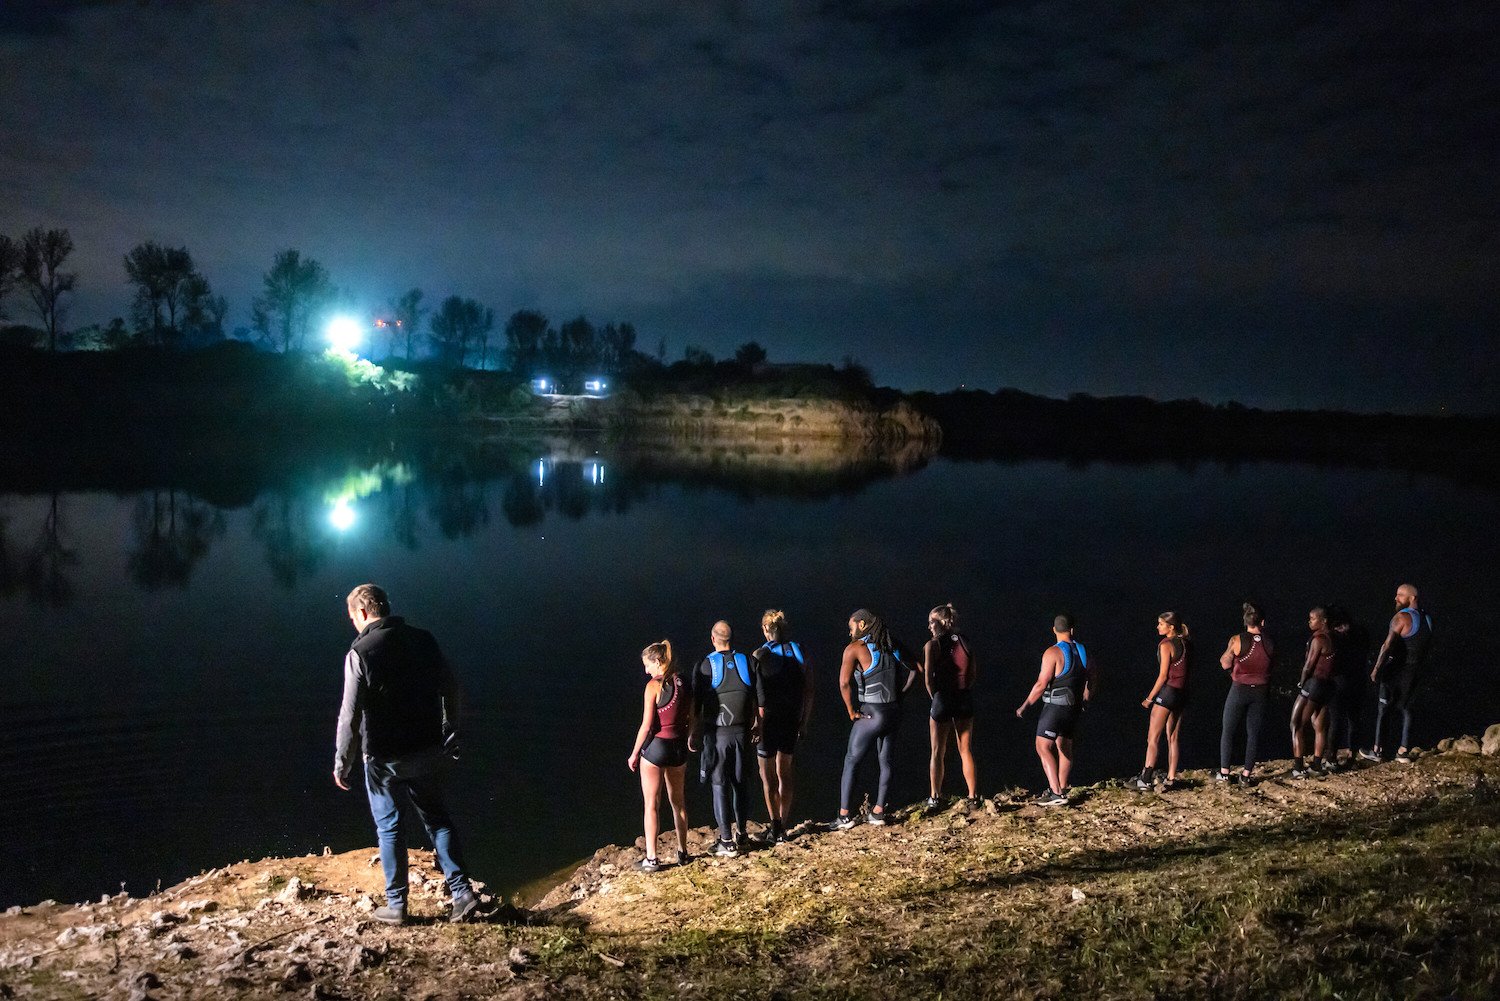 Competitors at night next to water in 'The Challenge: USA' final